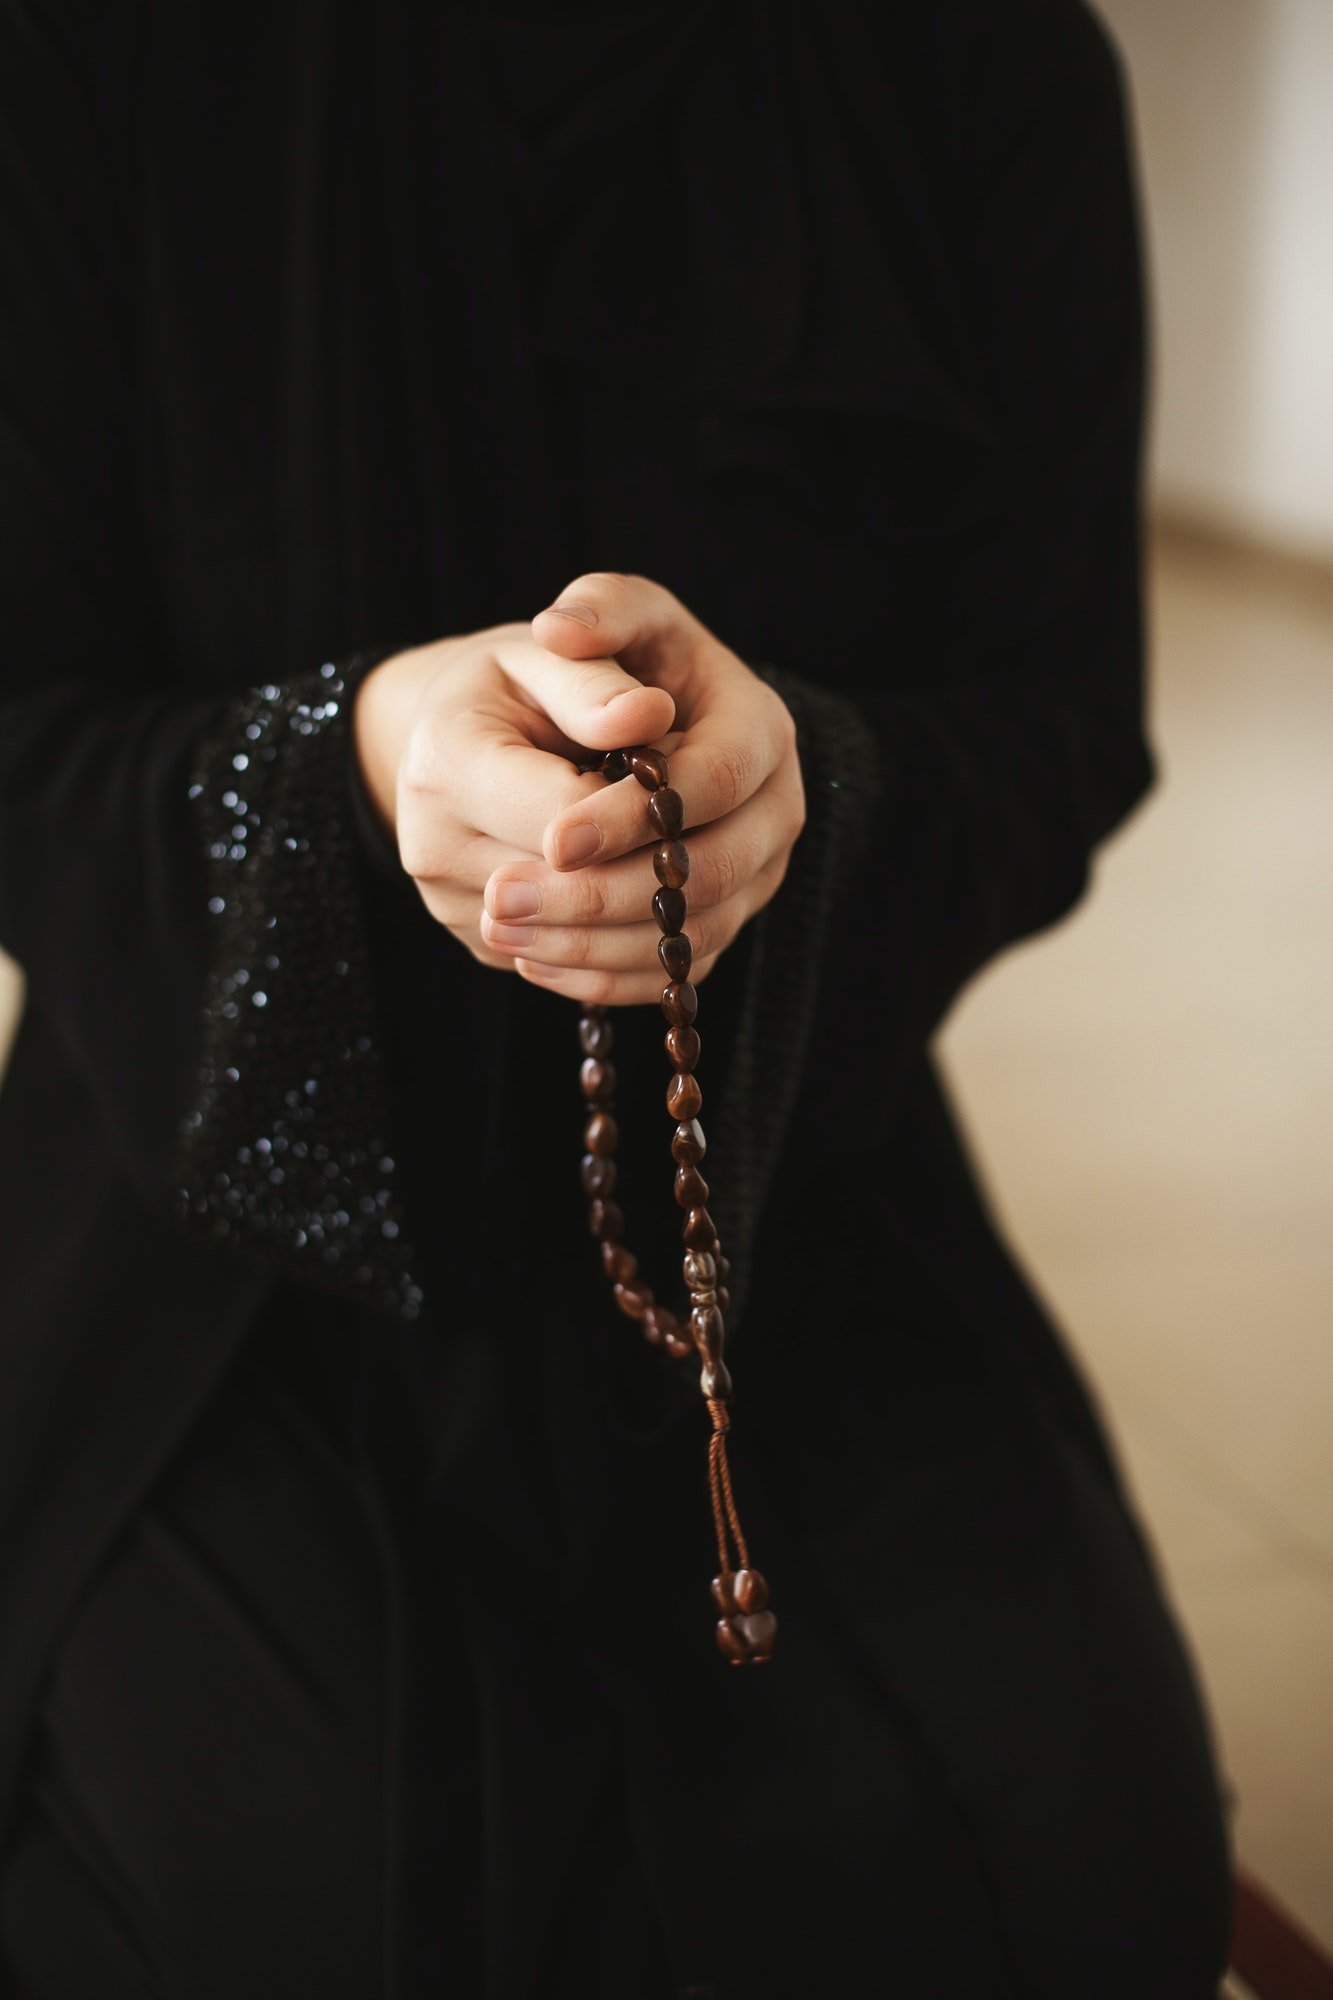 prayer-hands-of-a-woman-holding-a-rosary.jpg